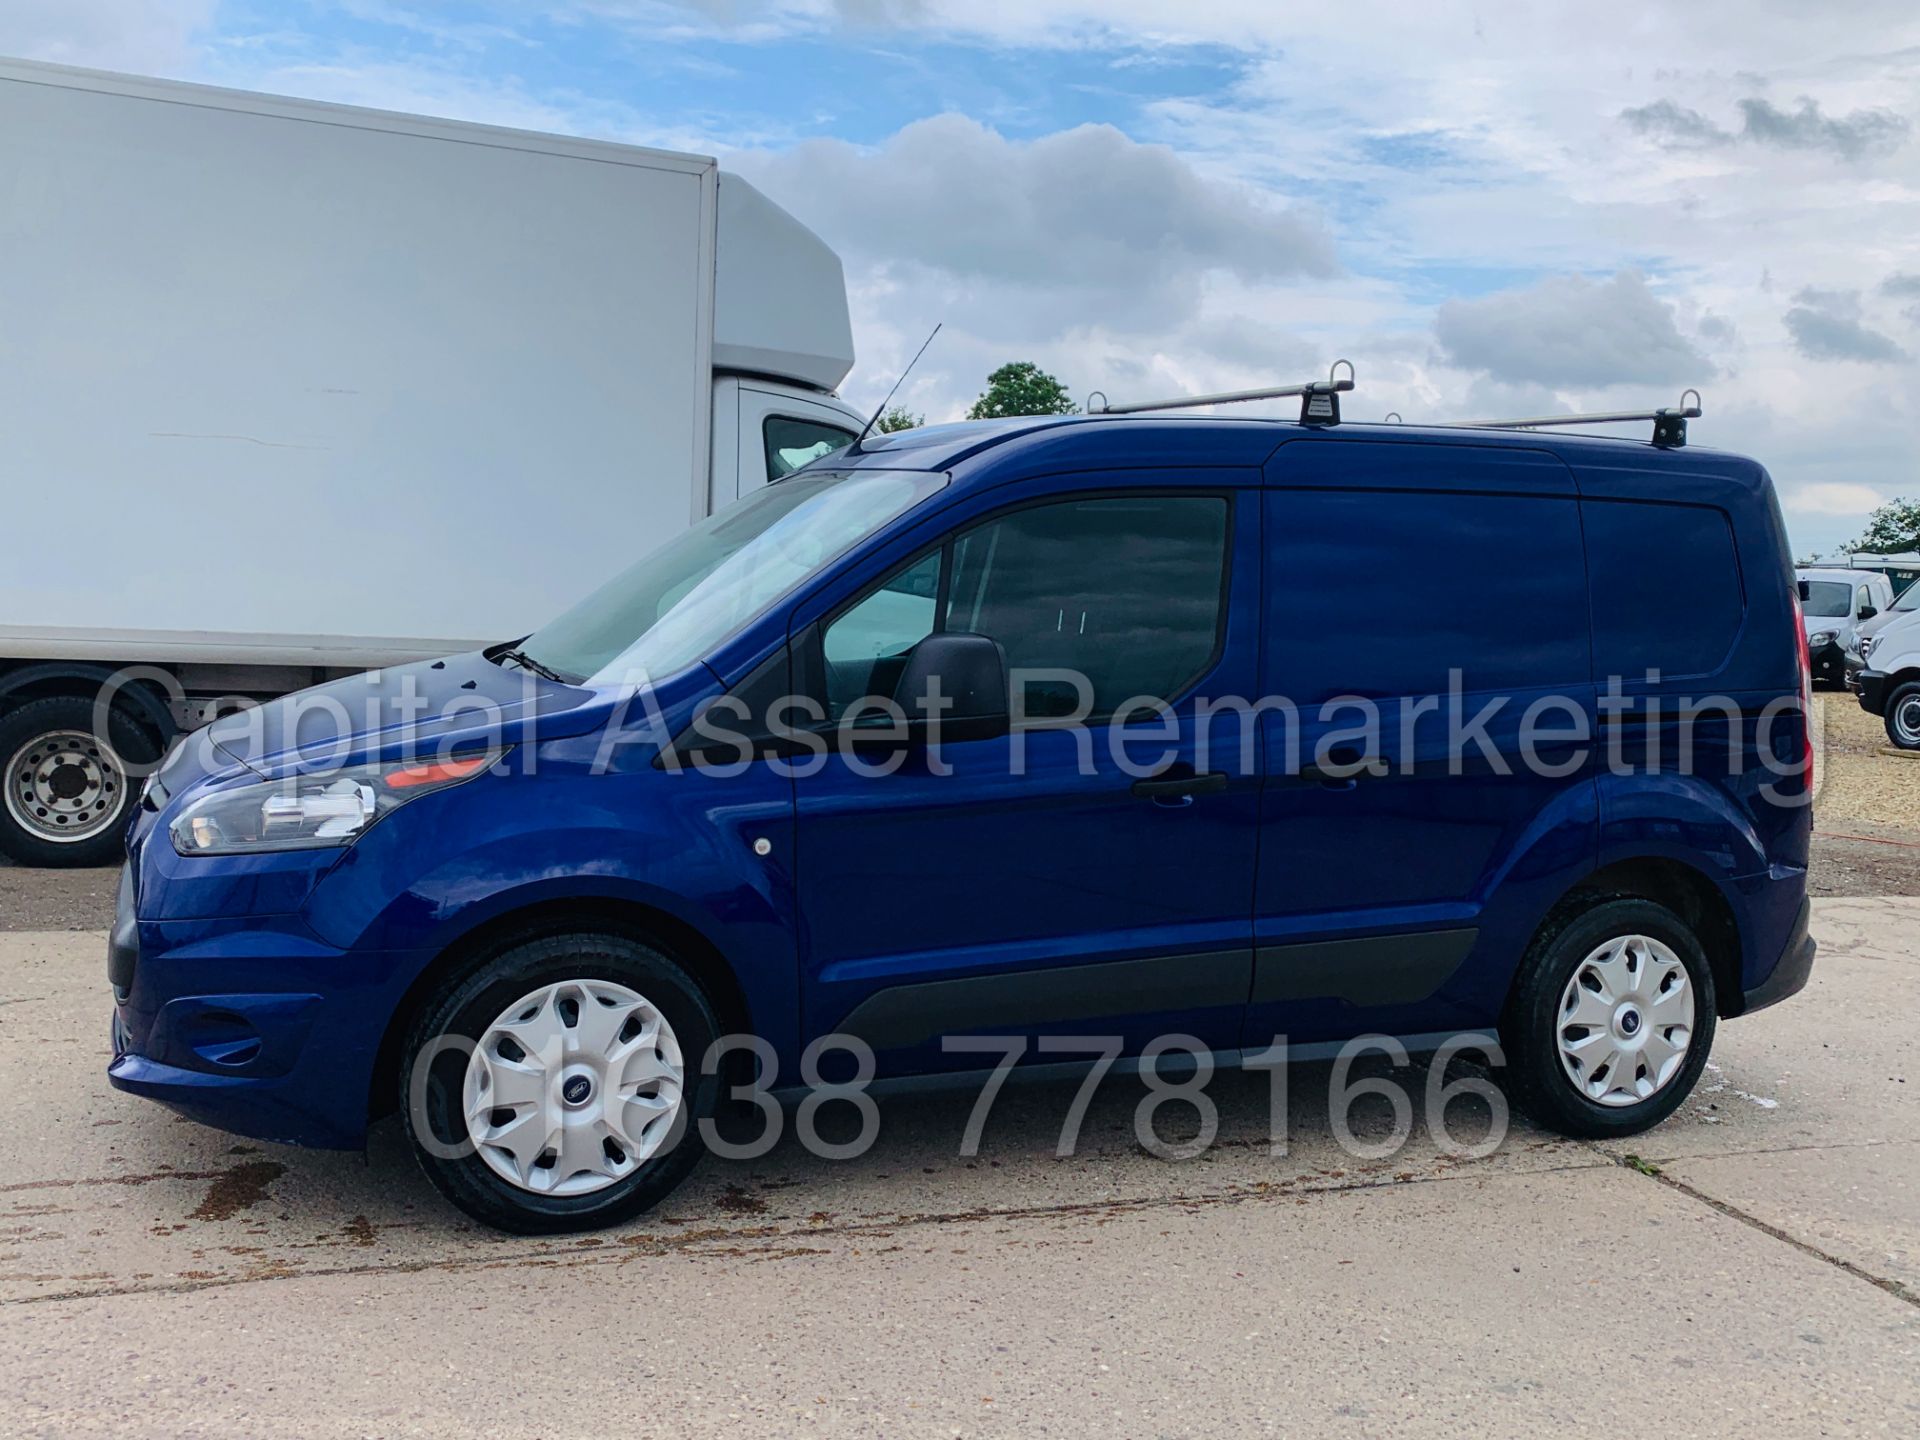 (On Sale) FORD TRANSIT CONNECT *TREND* SWB (2017 - EURO 6 VERSION) '1.5 TDCI - 100 BHP' (1 OWNER) - Image 4 of 39